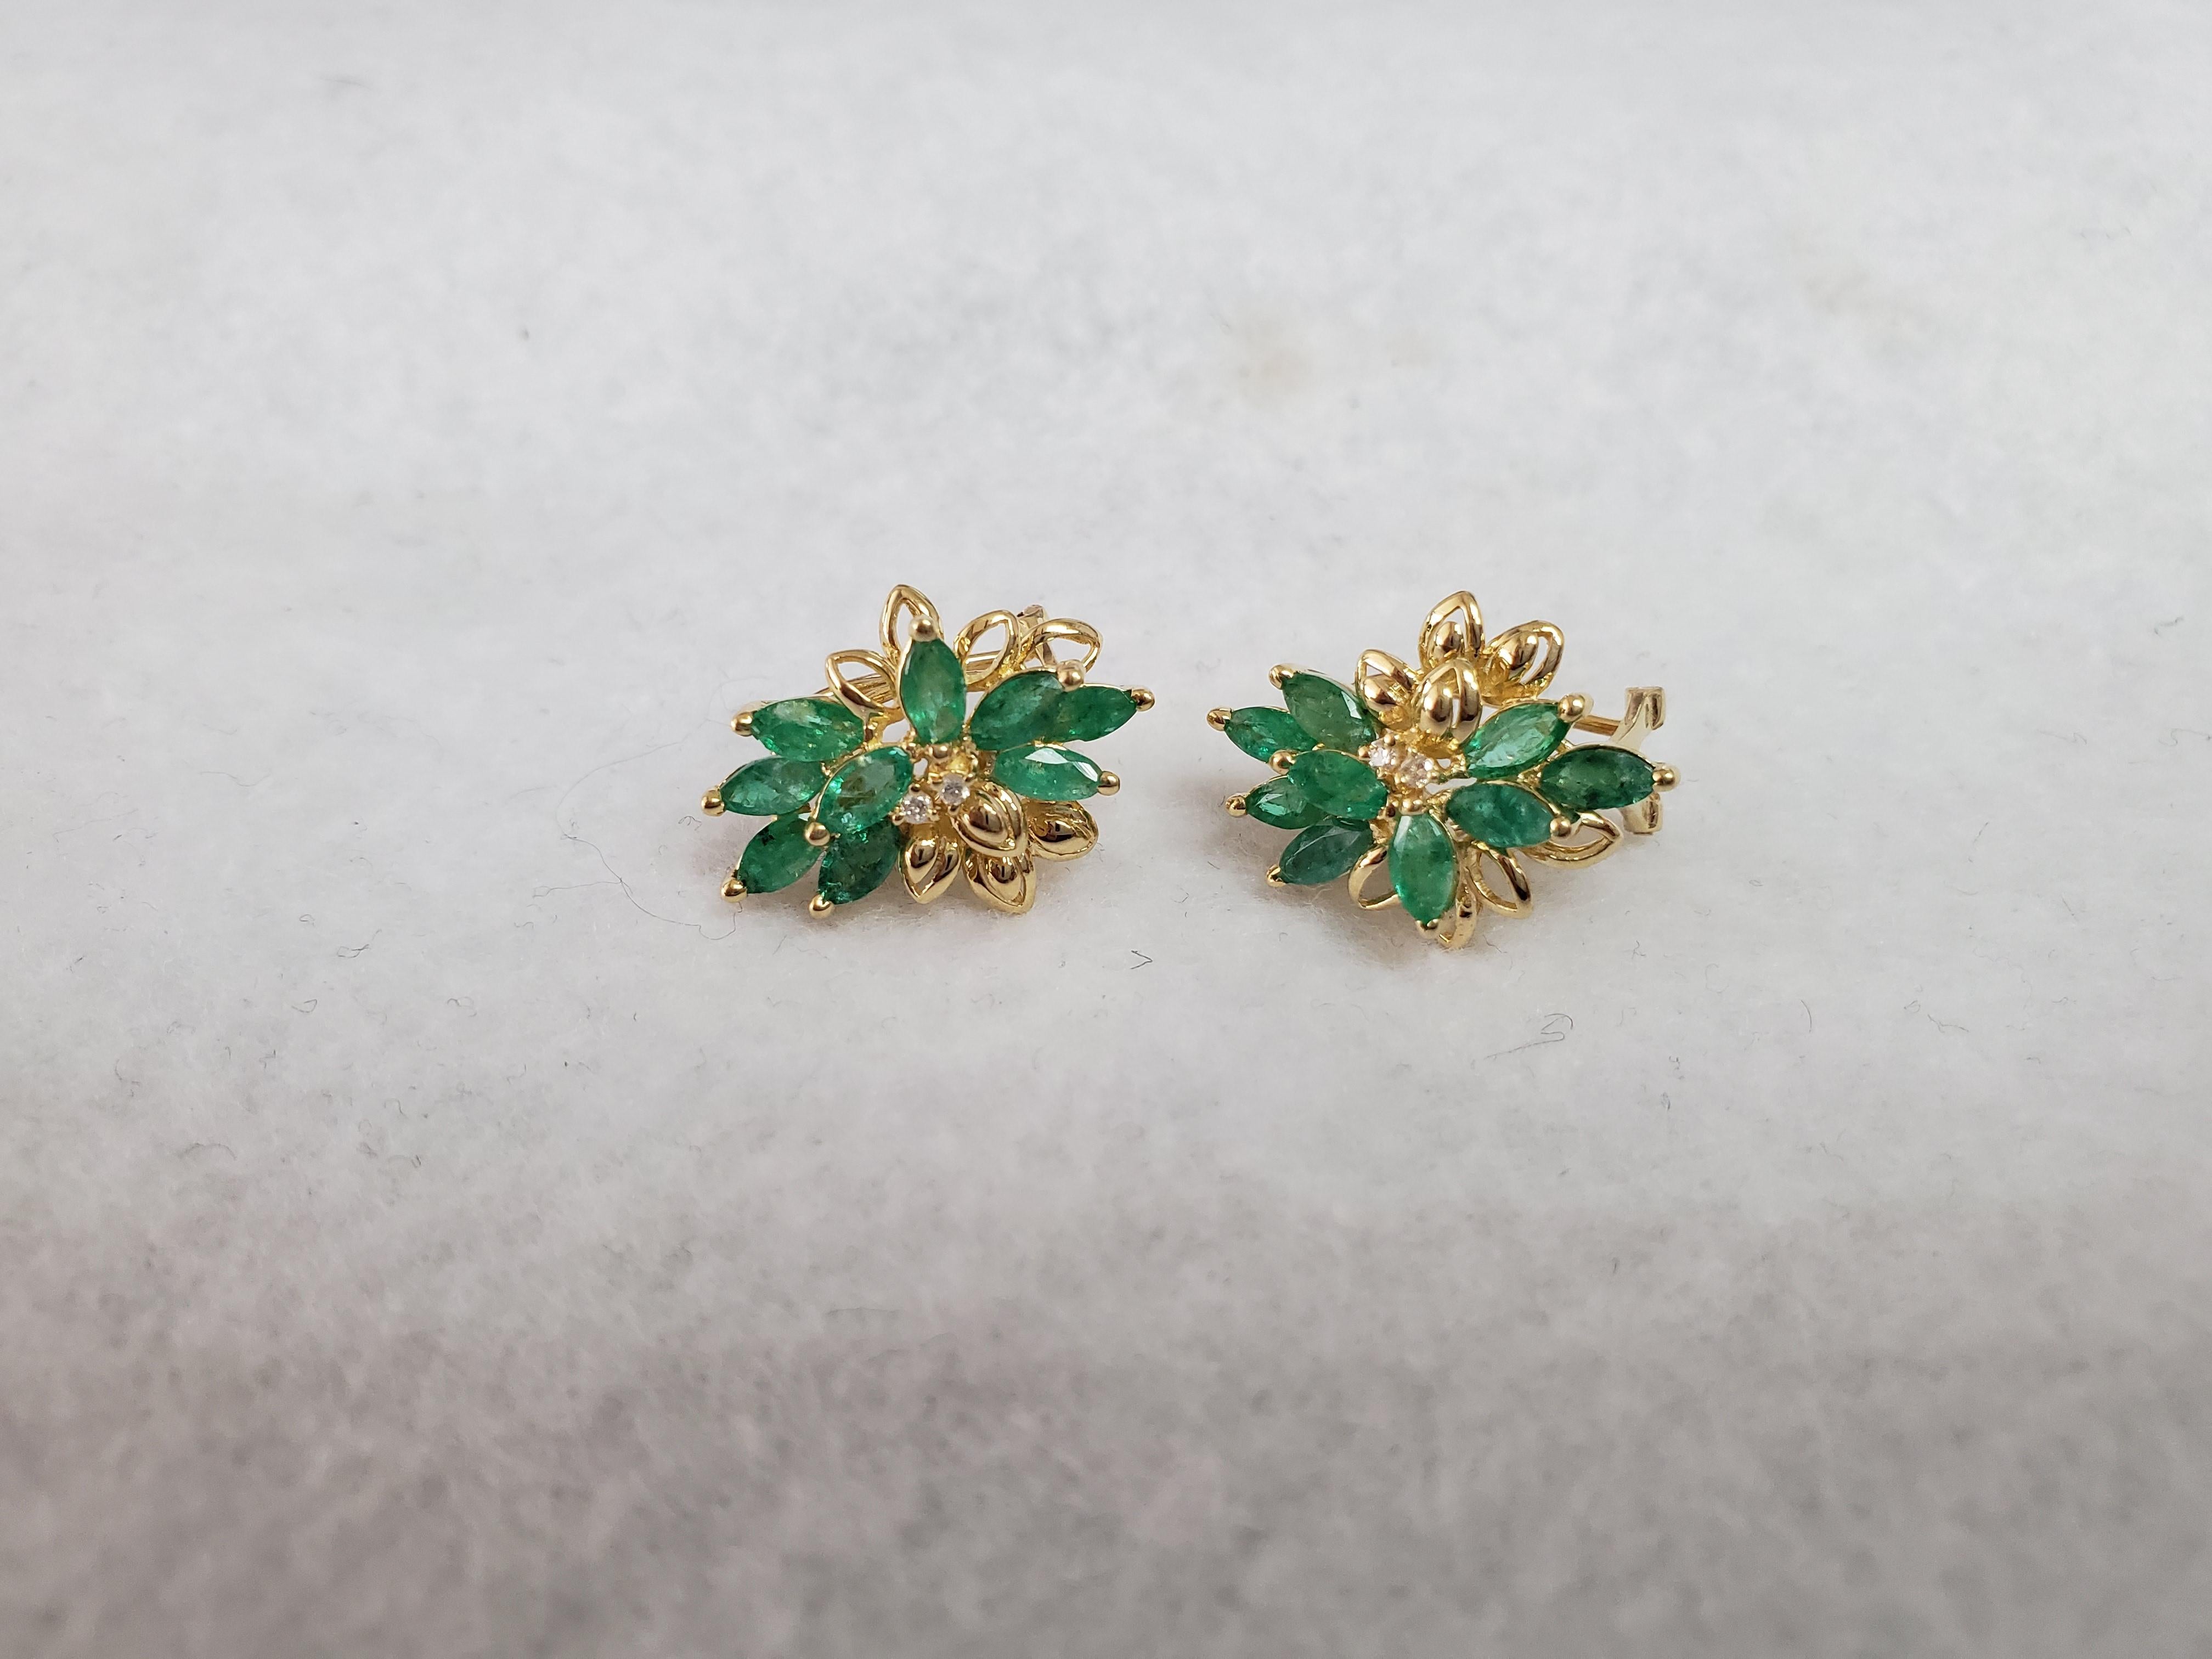 Emerald Cluster Earrings 14Kk Yellow Gold In New Condition For Sale In Sugar Land, TX